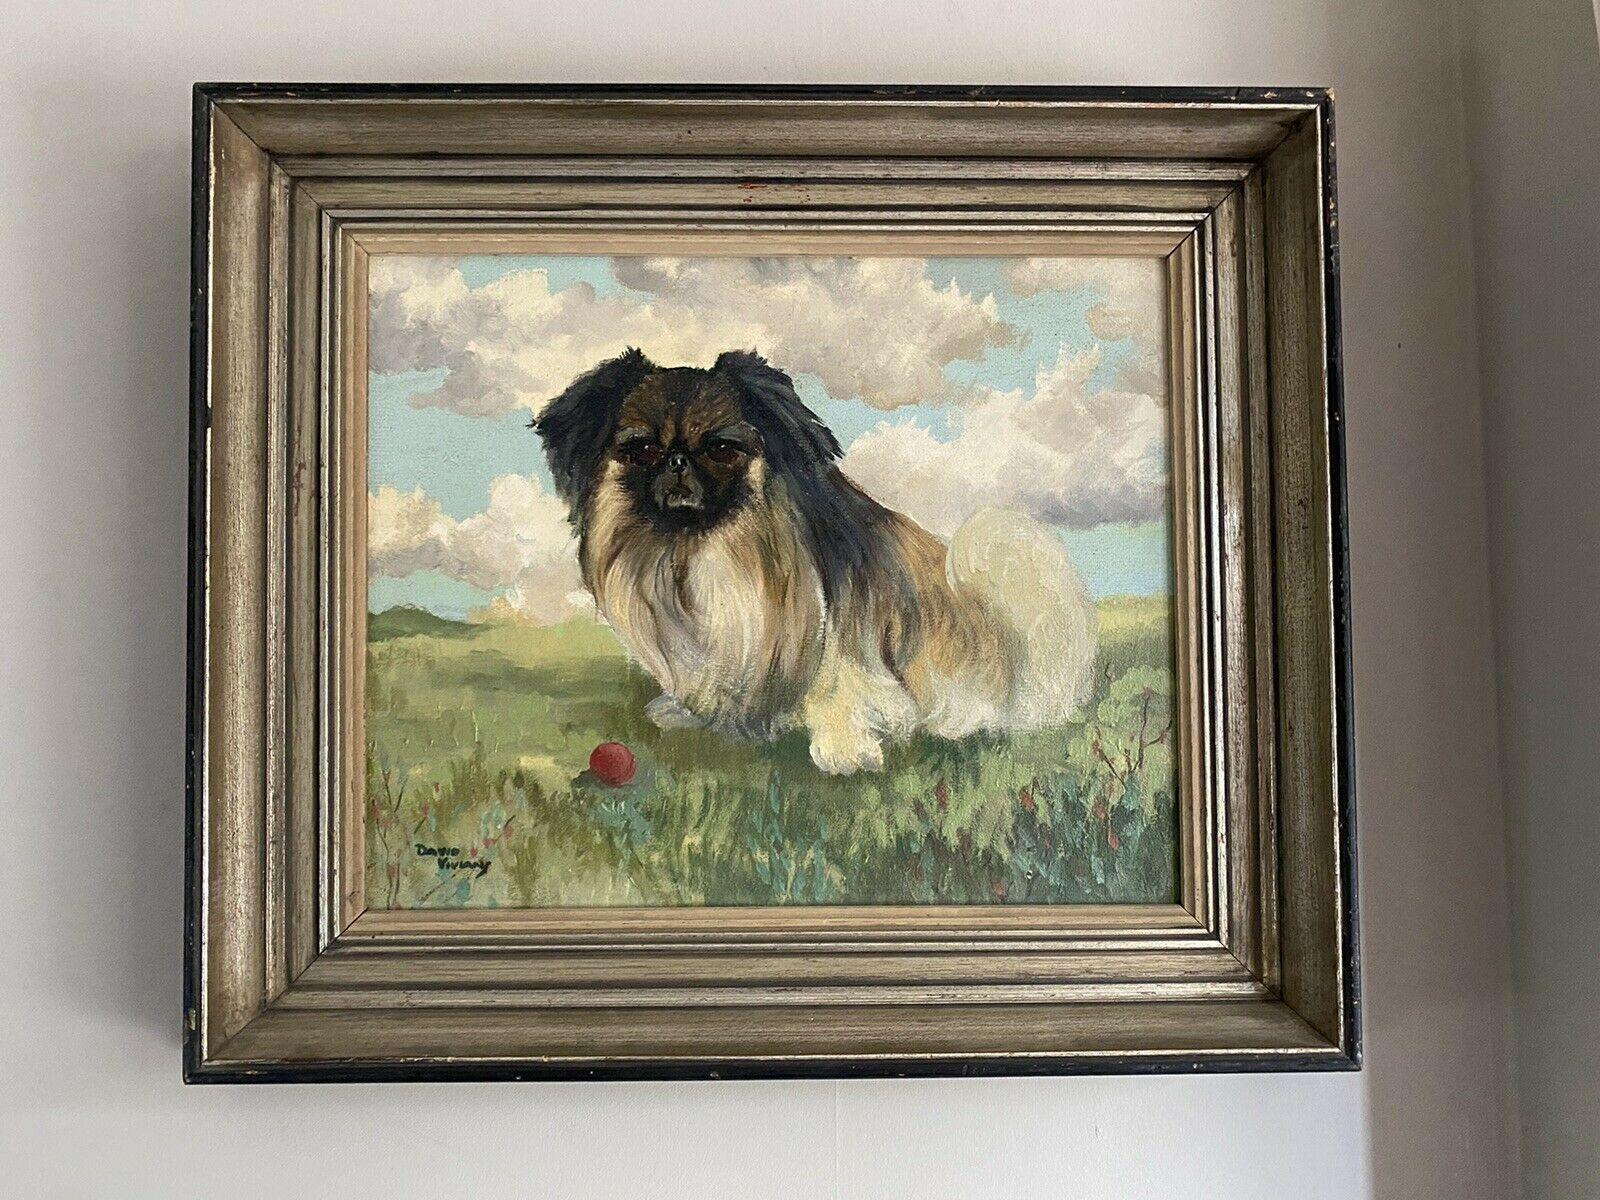 SIGNED 1950'S ENGLISH DOG OIL PAINTING - THE PEKINGESE WITH BALL IN LANDSCAPE - Painting by David Vivian